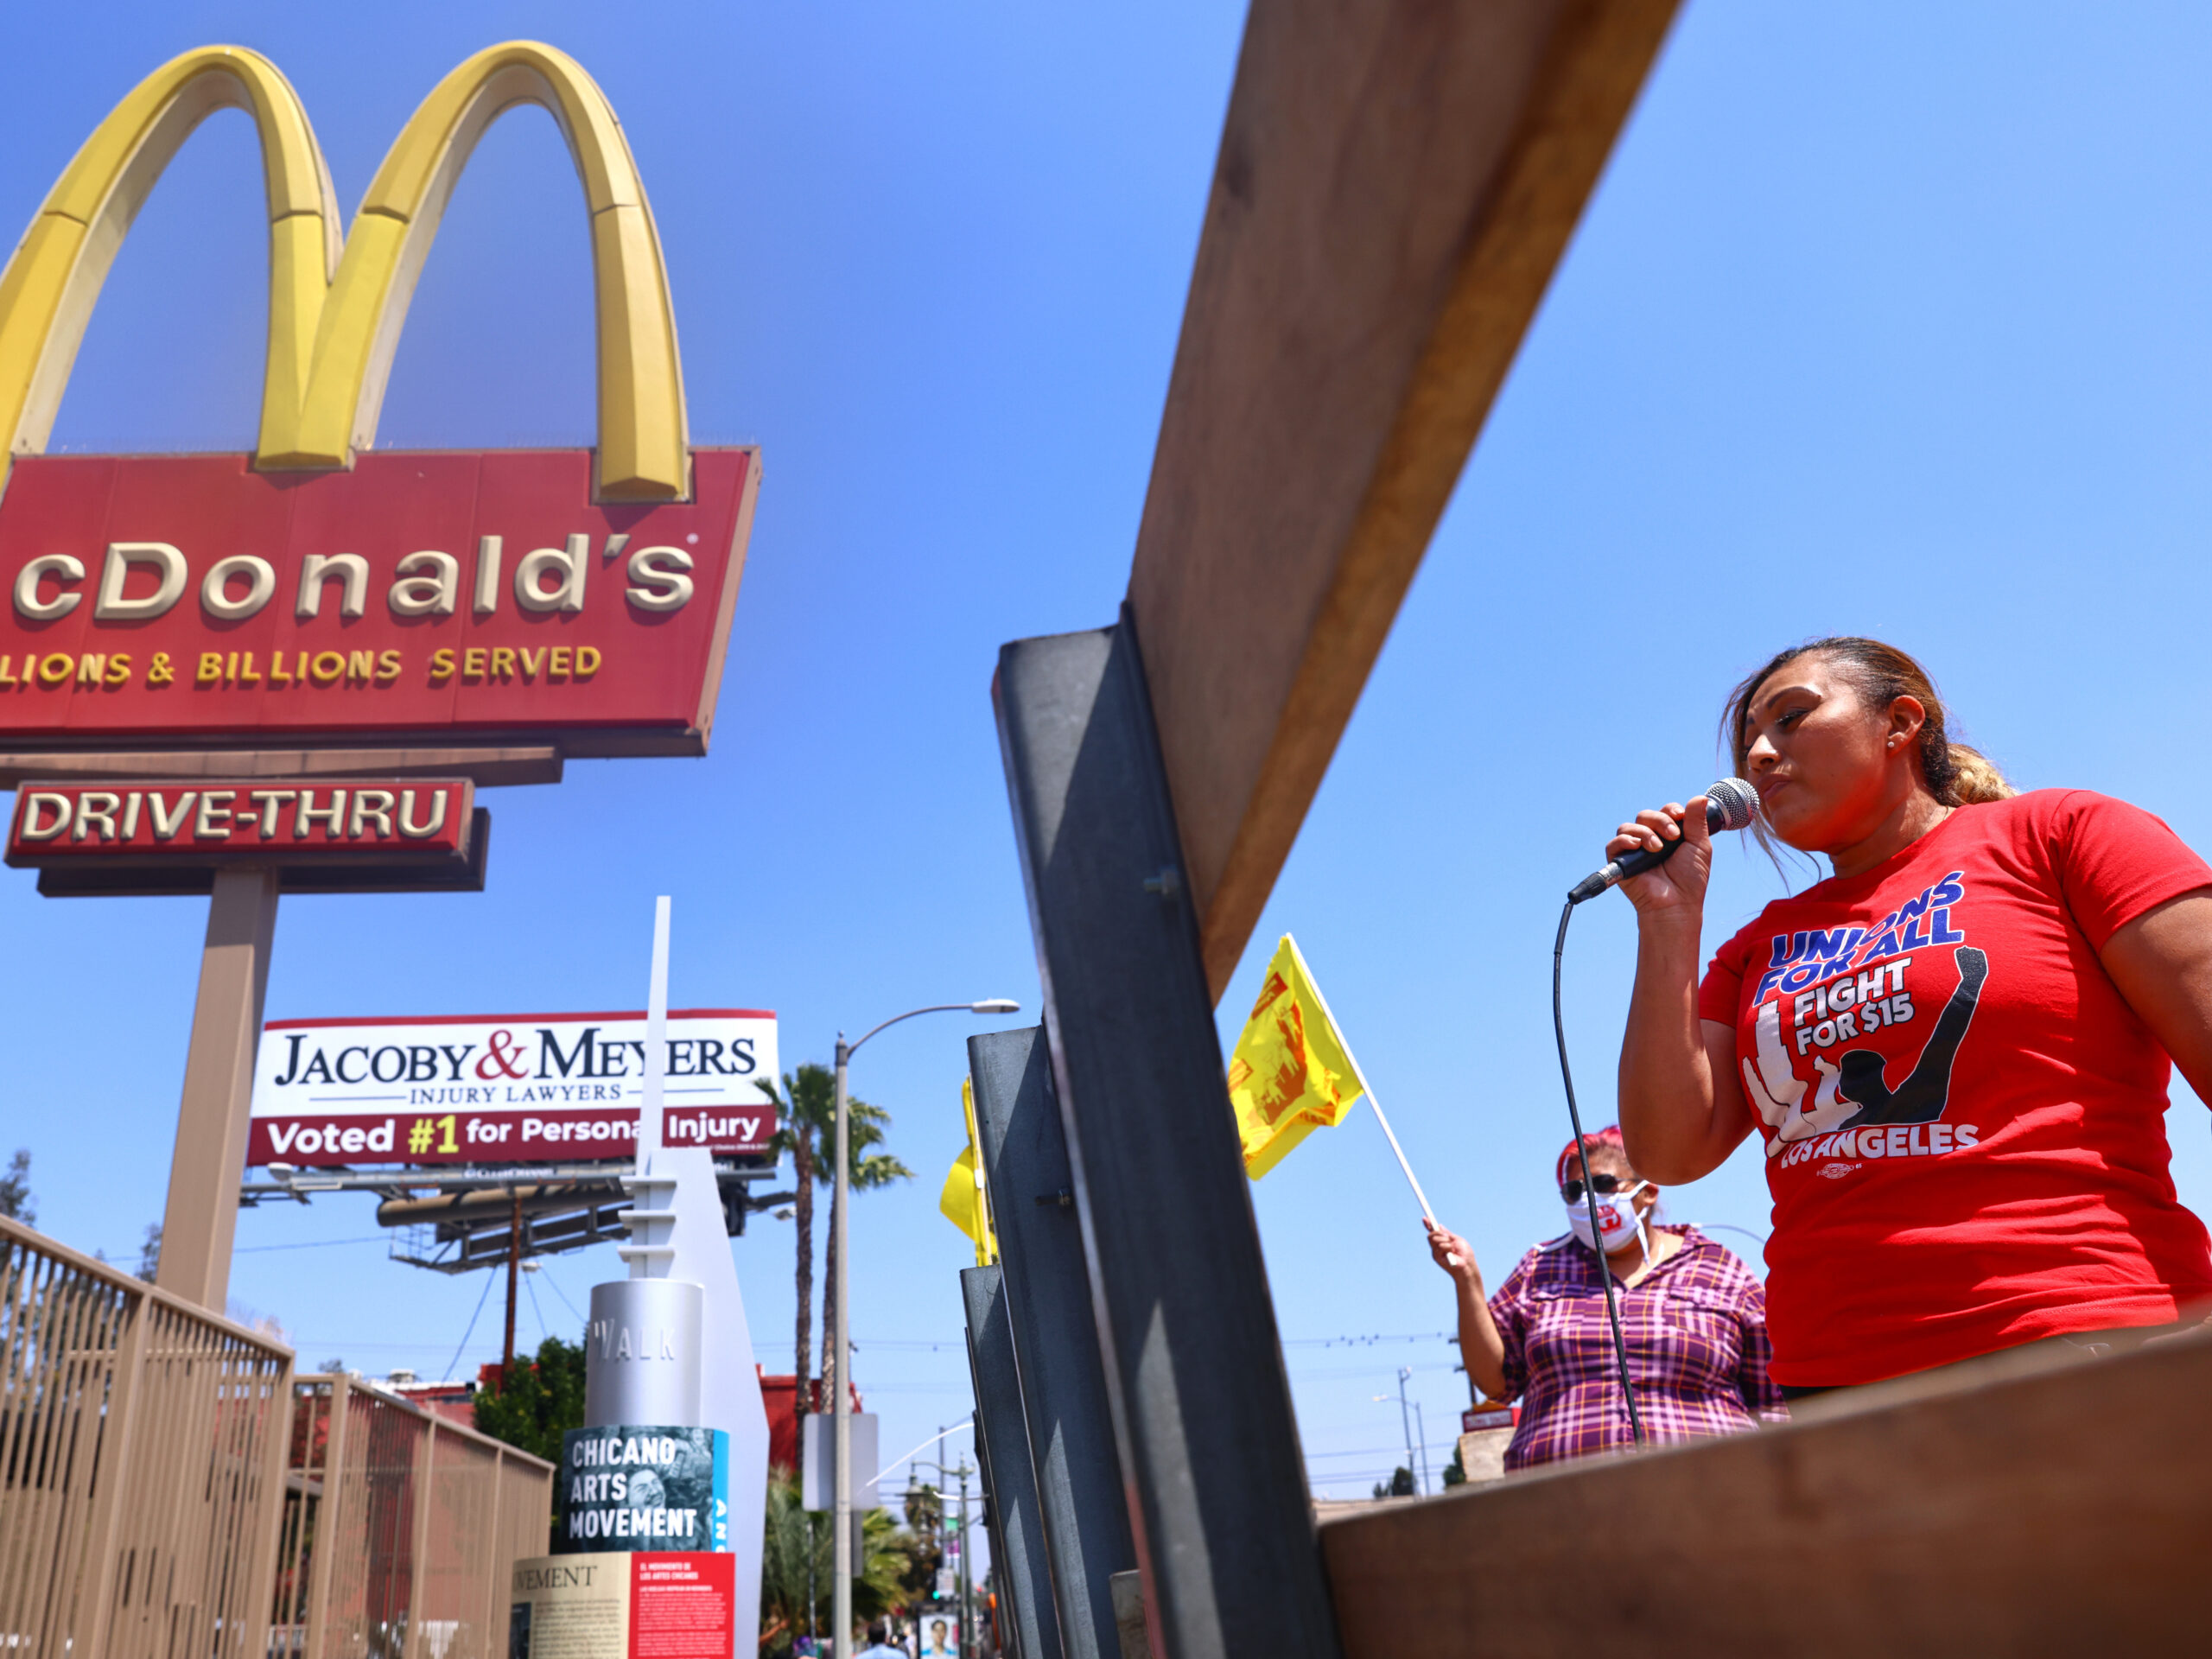 Half a million California workers will get $20 minimum wage, starting today